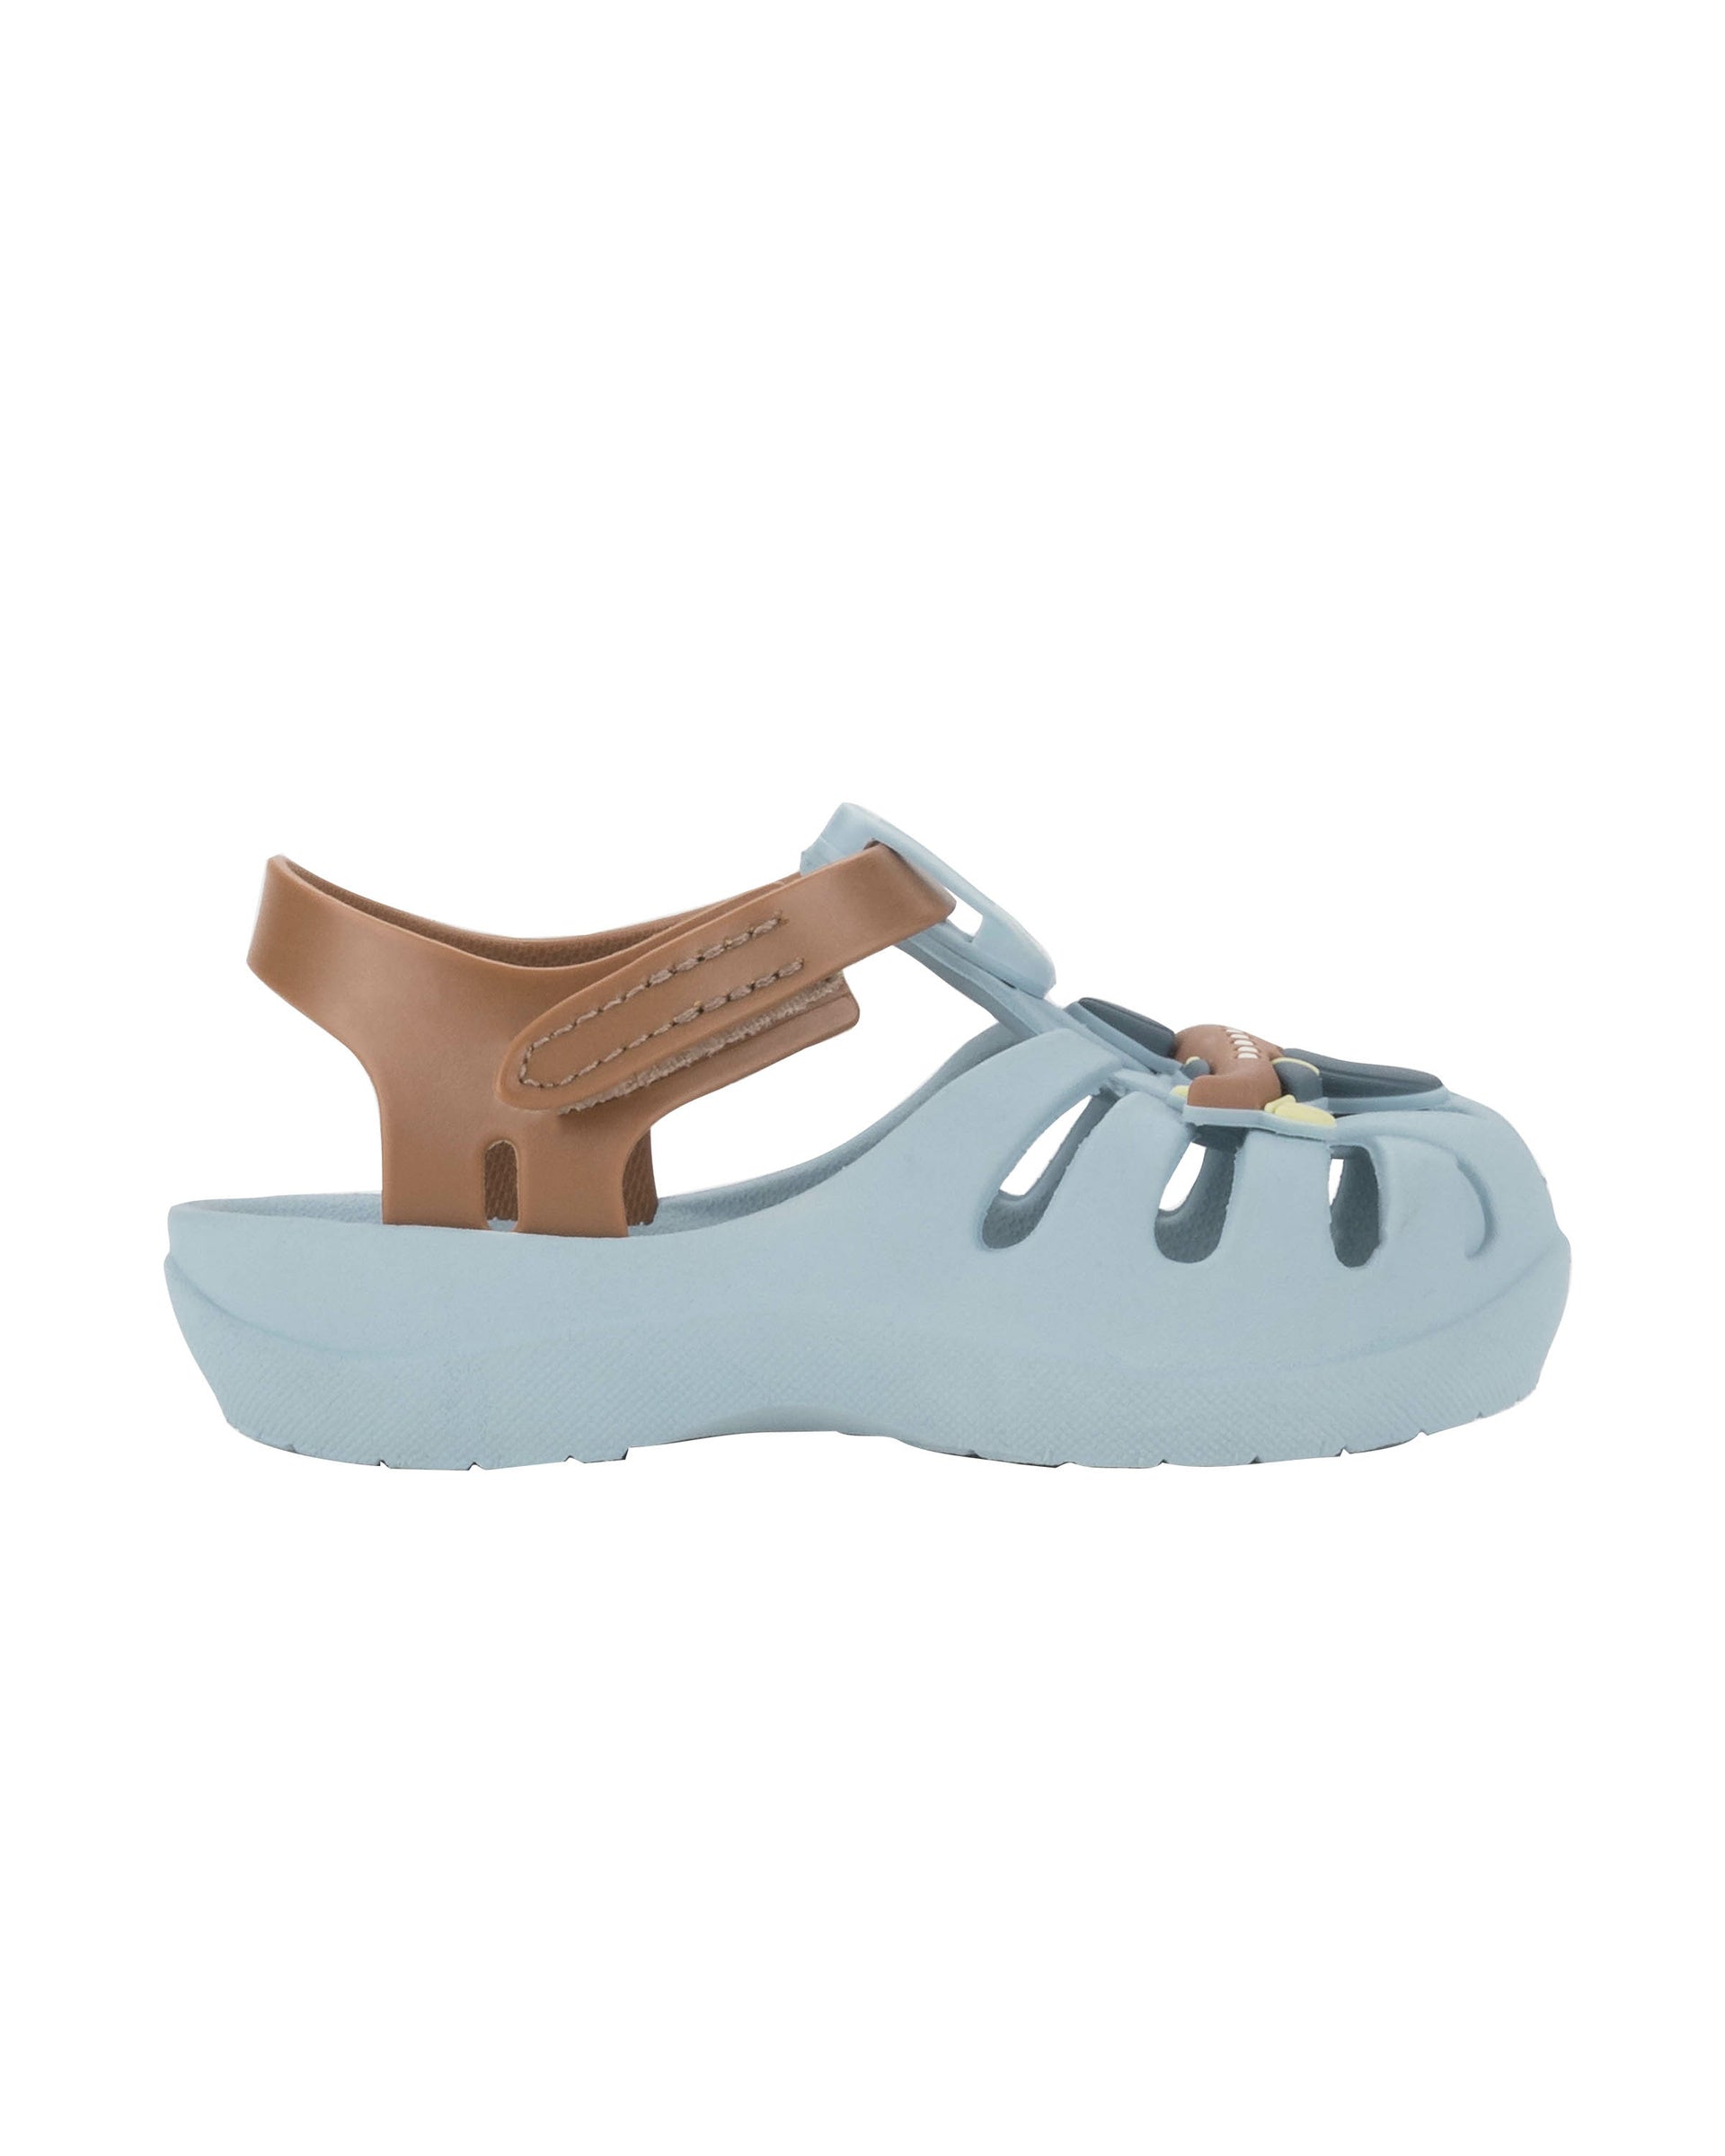 Outer side view of a blue Ipanema Summer baby sandal with airplane on the upper and a brown strap.